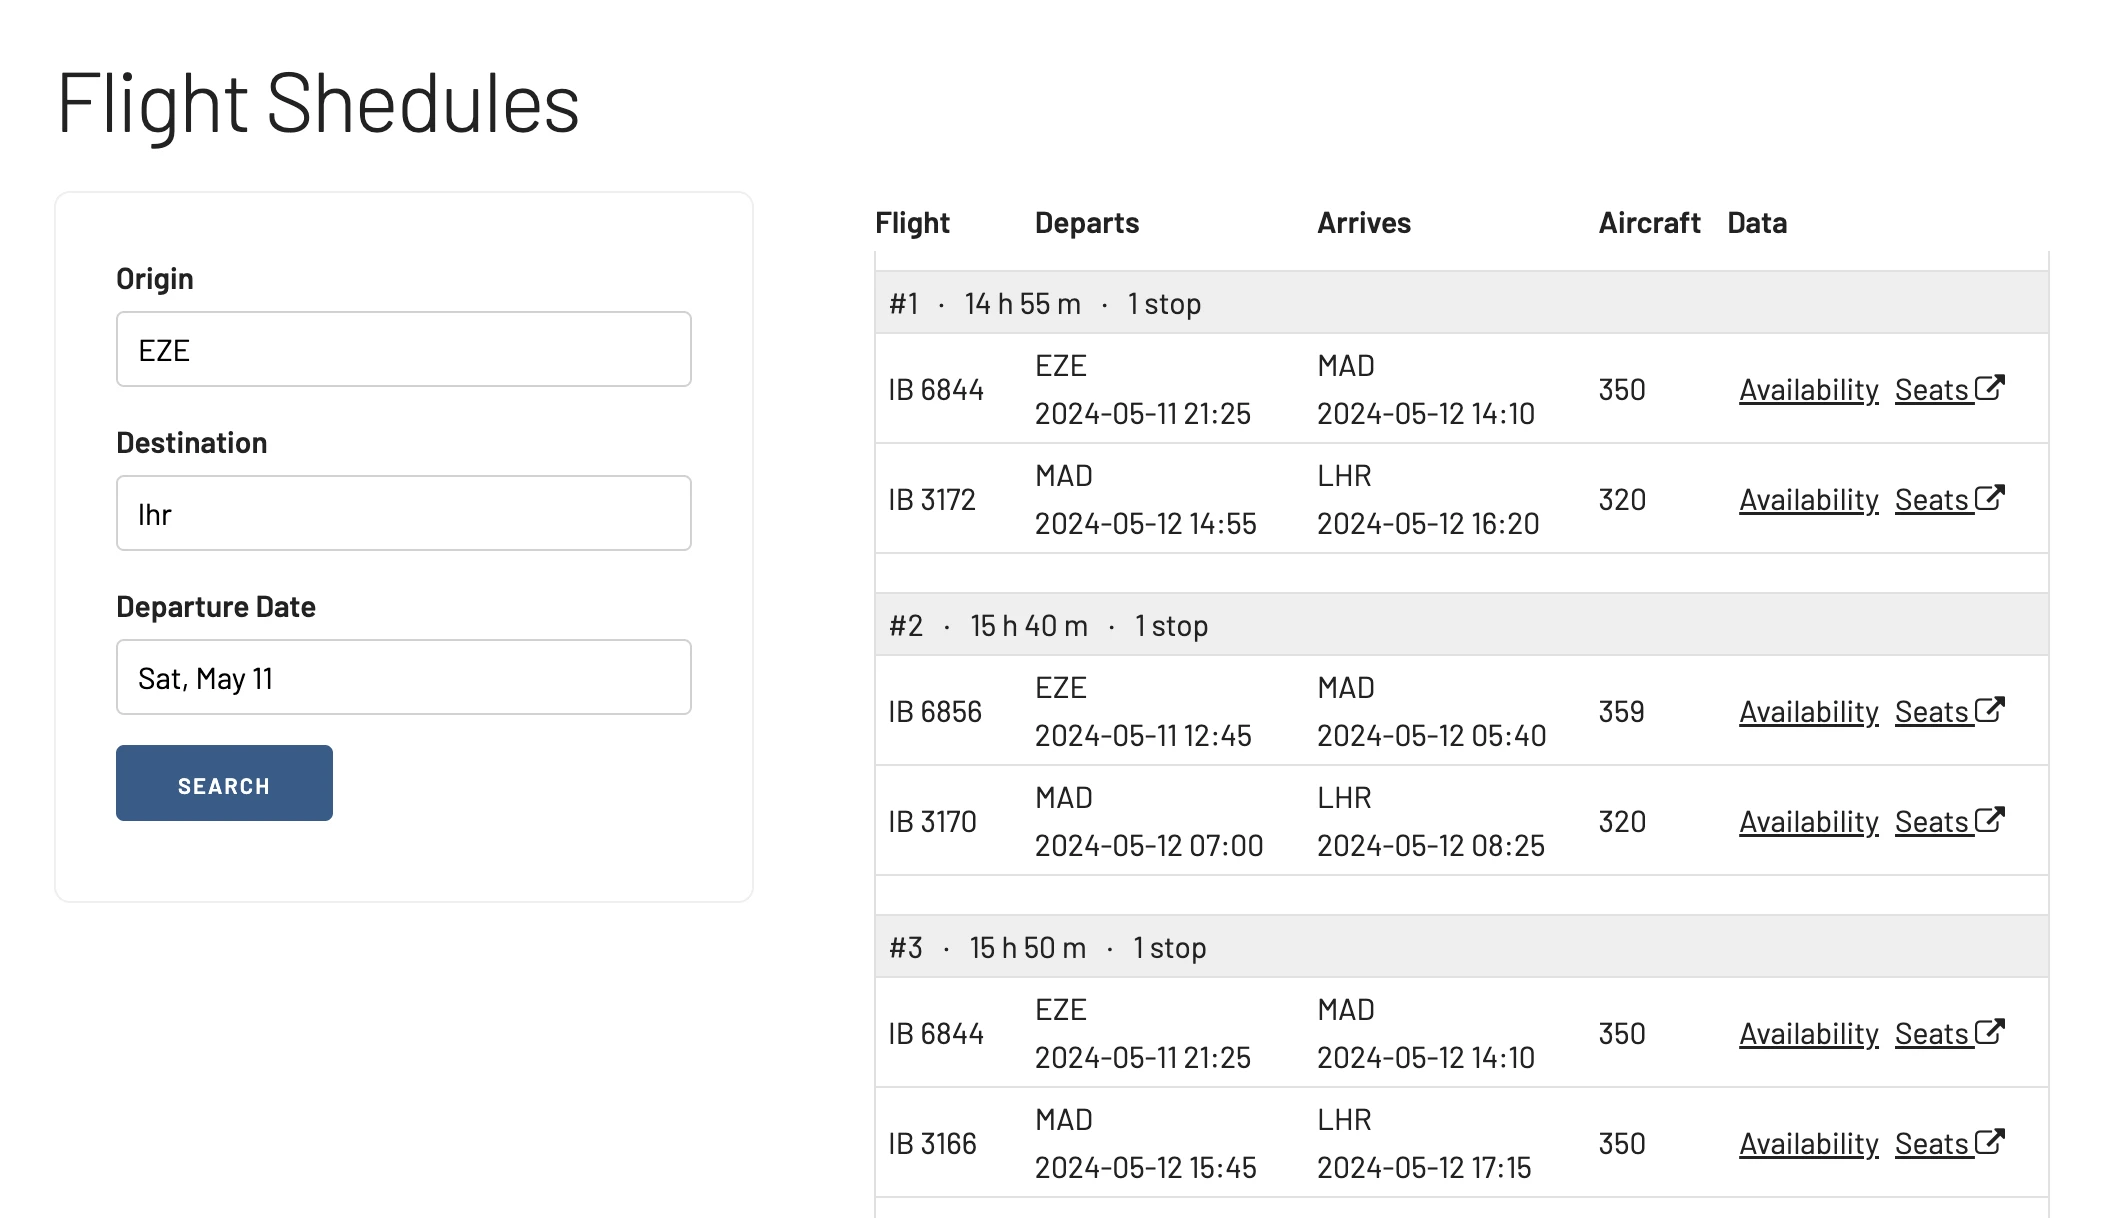 AwardFares lets you check flight schedules for a desired route and date.